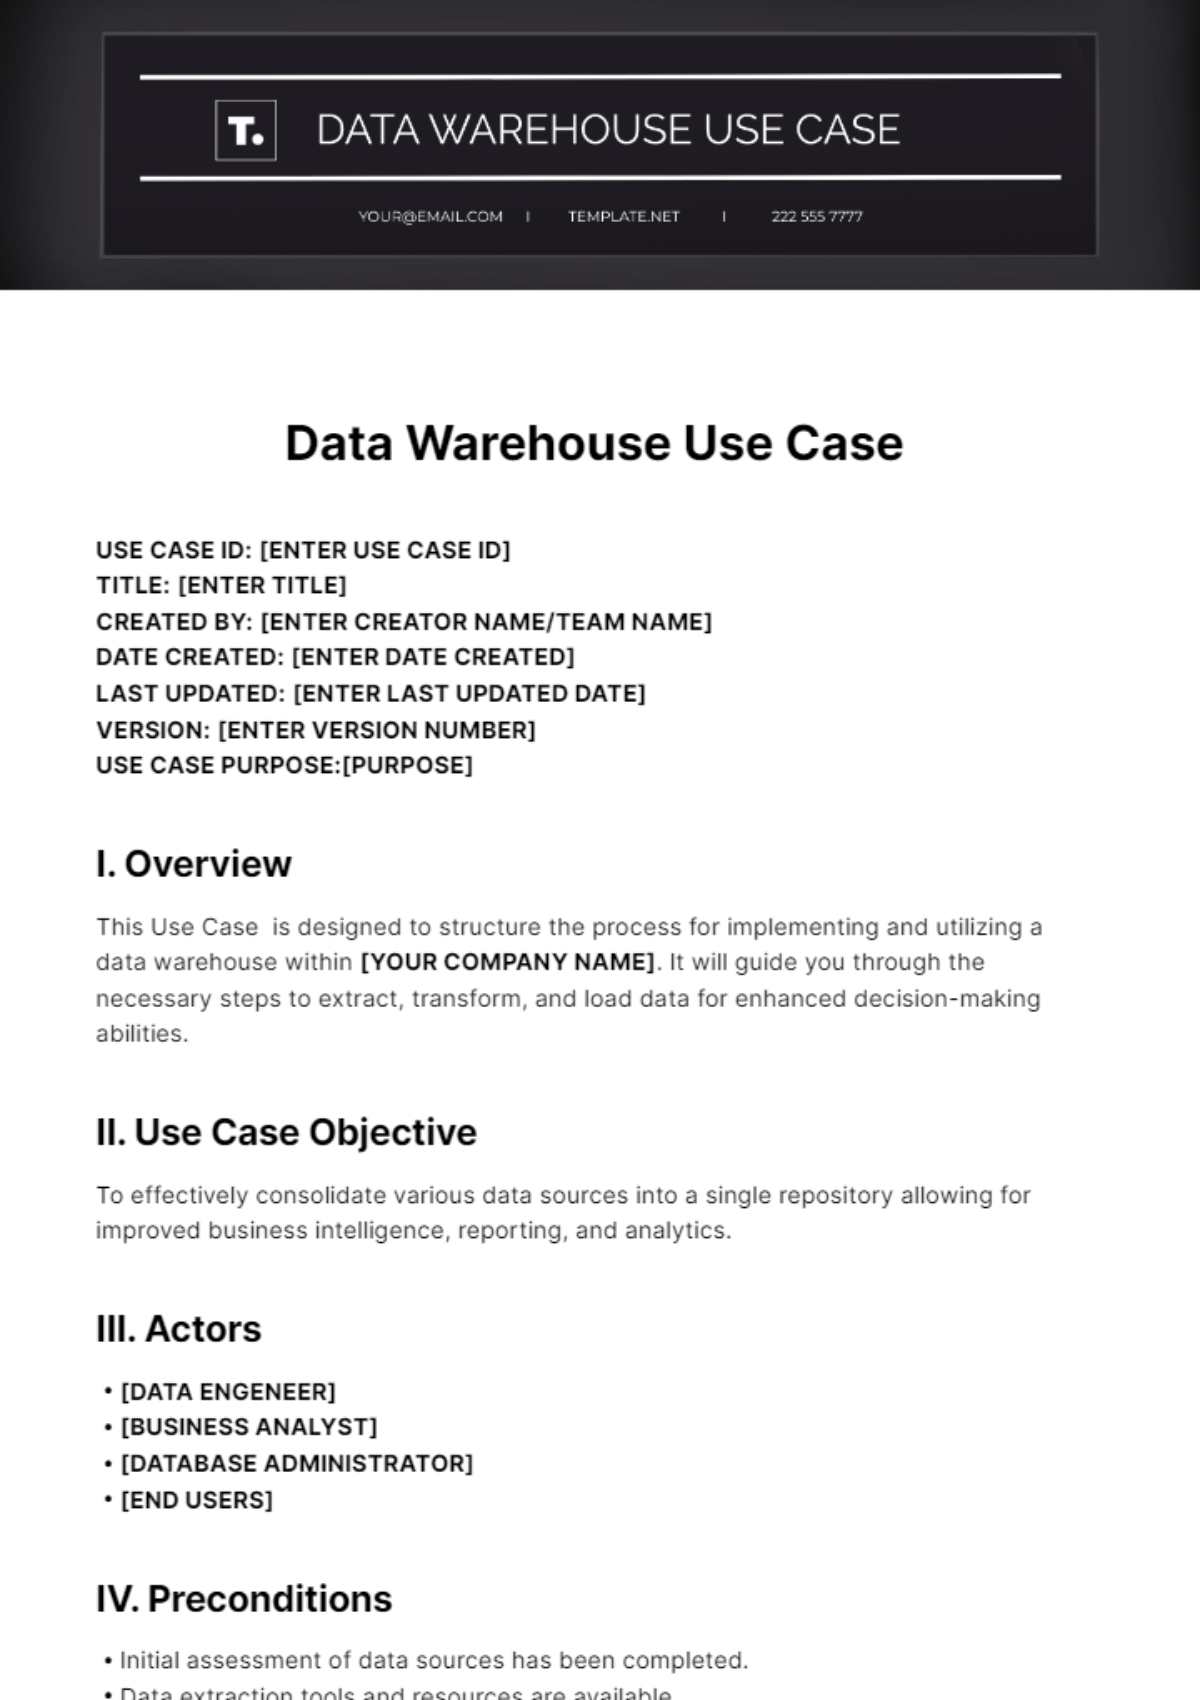 Data Warehouse Use Case Template